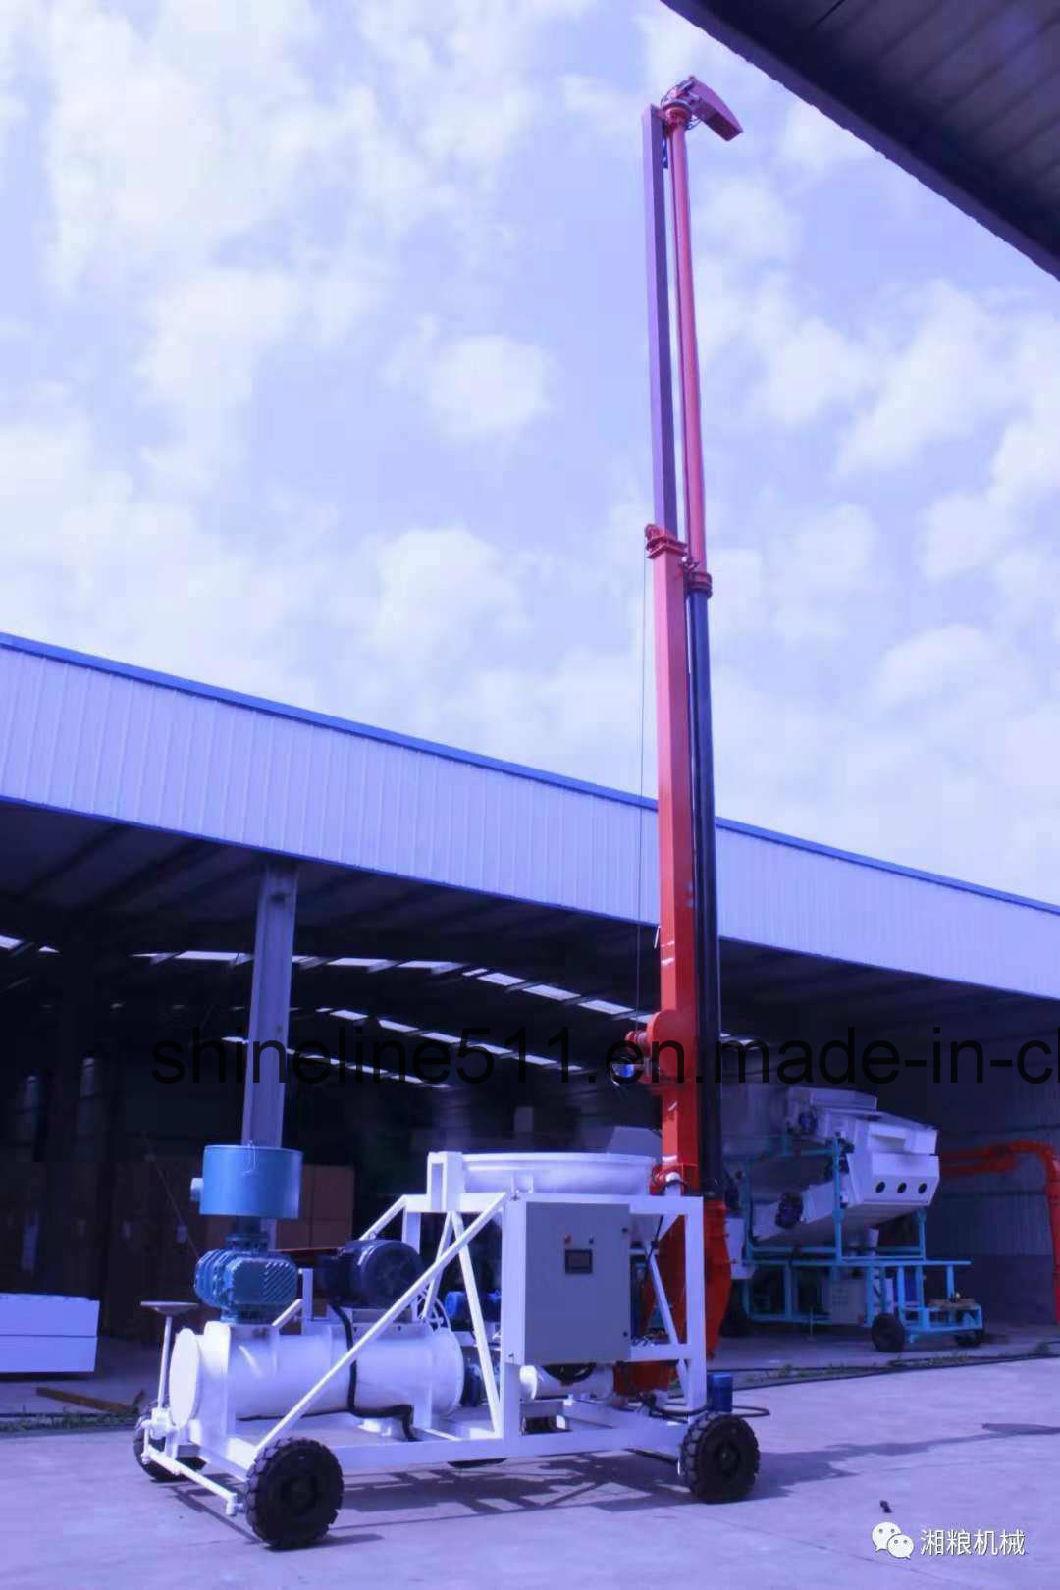 Carbon Steel Available Xiangliang Brand Silo Pump Port Grain Unloader